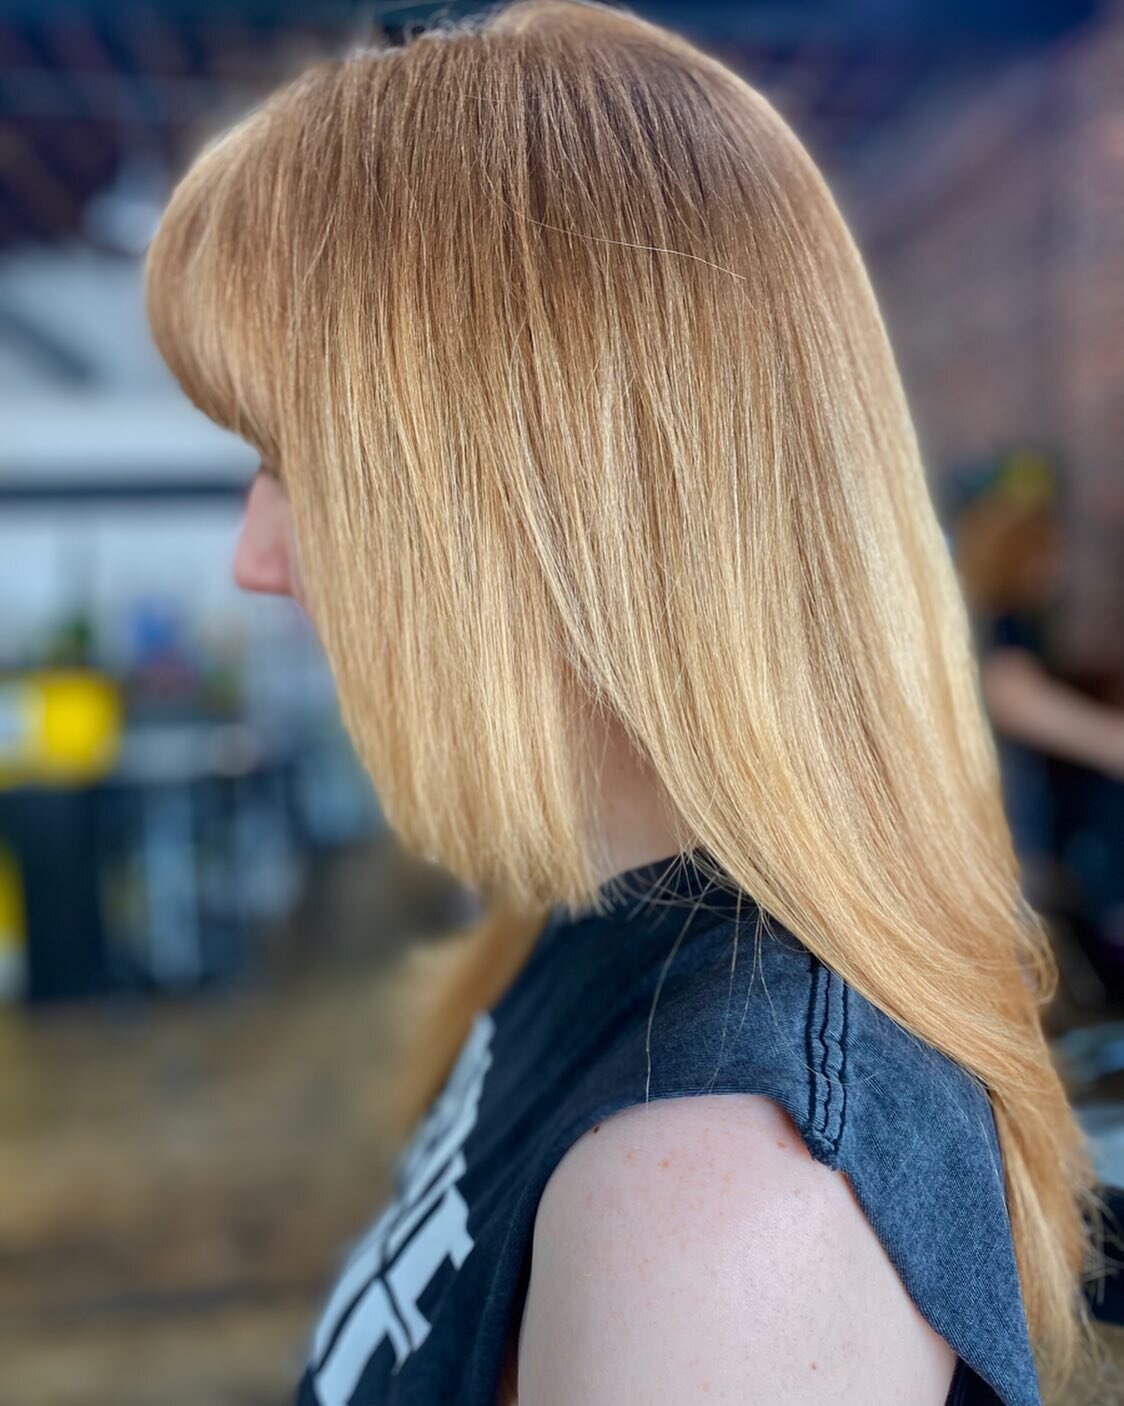 𝐻𝒾𝓂𝑒~ (｡・‧̫・｡) ♡ 

I had the absolute pleasure of doing my first ever (and their first ever) Hime cut! They wanted the shorter bits to come down longer almost bob length and we added some texture in there just to diffuse the bluntness of the shor